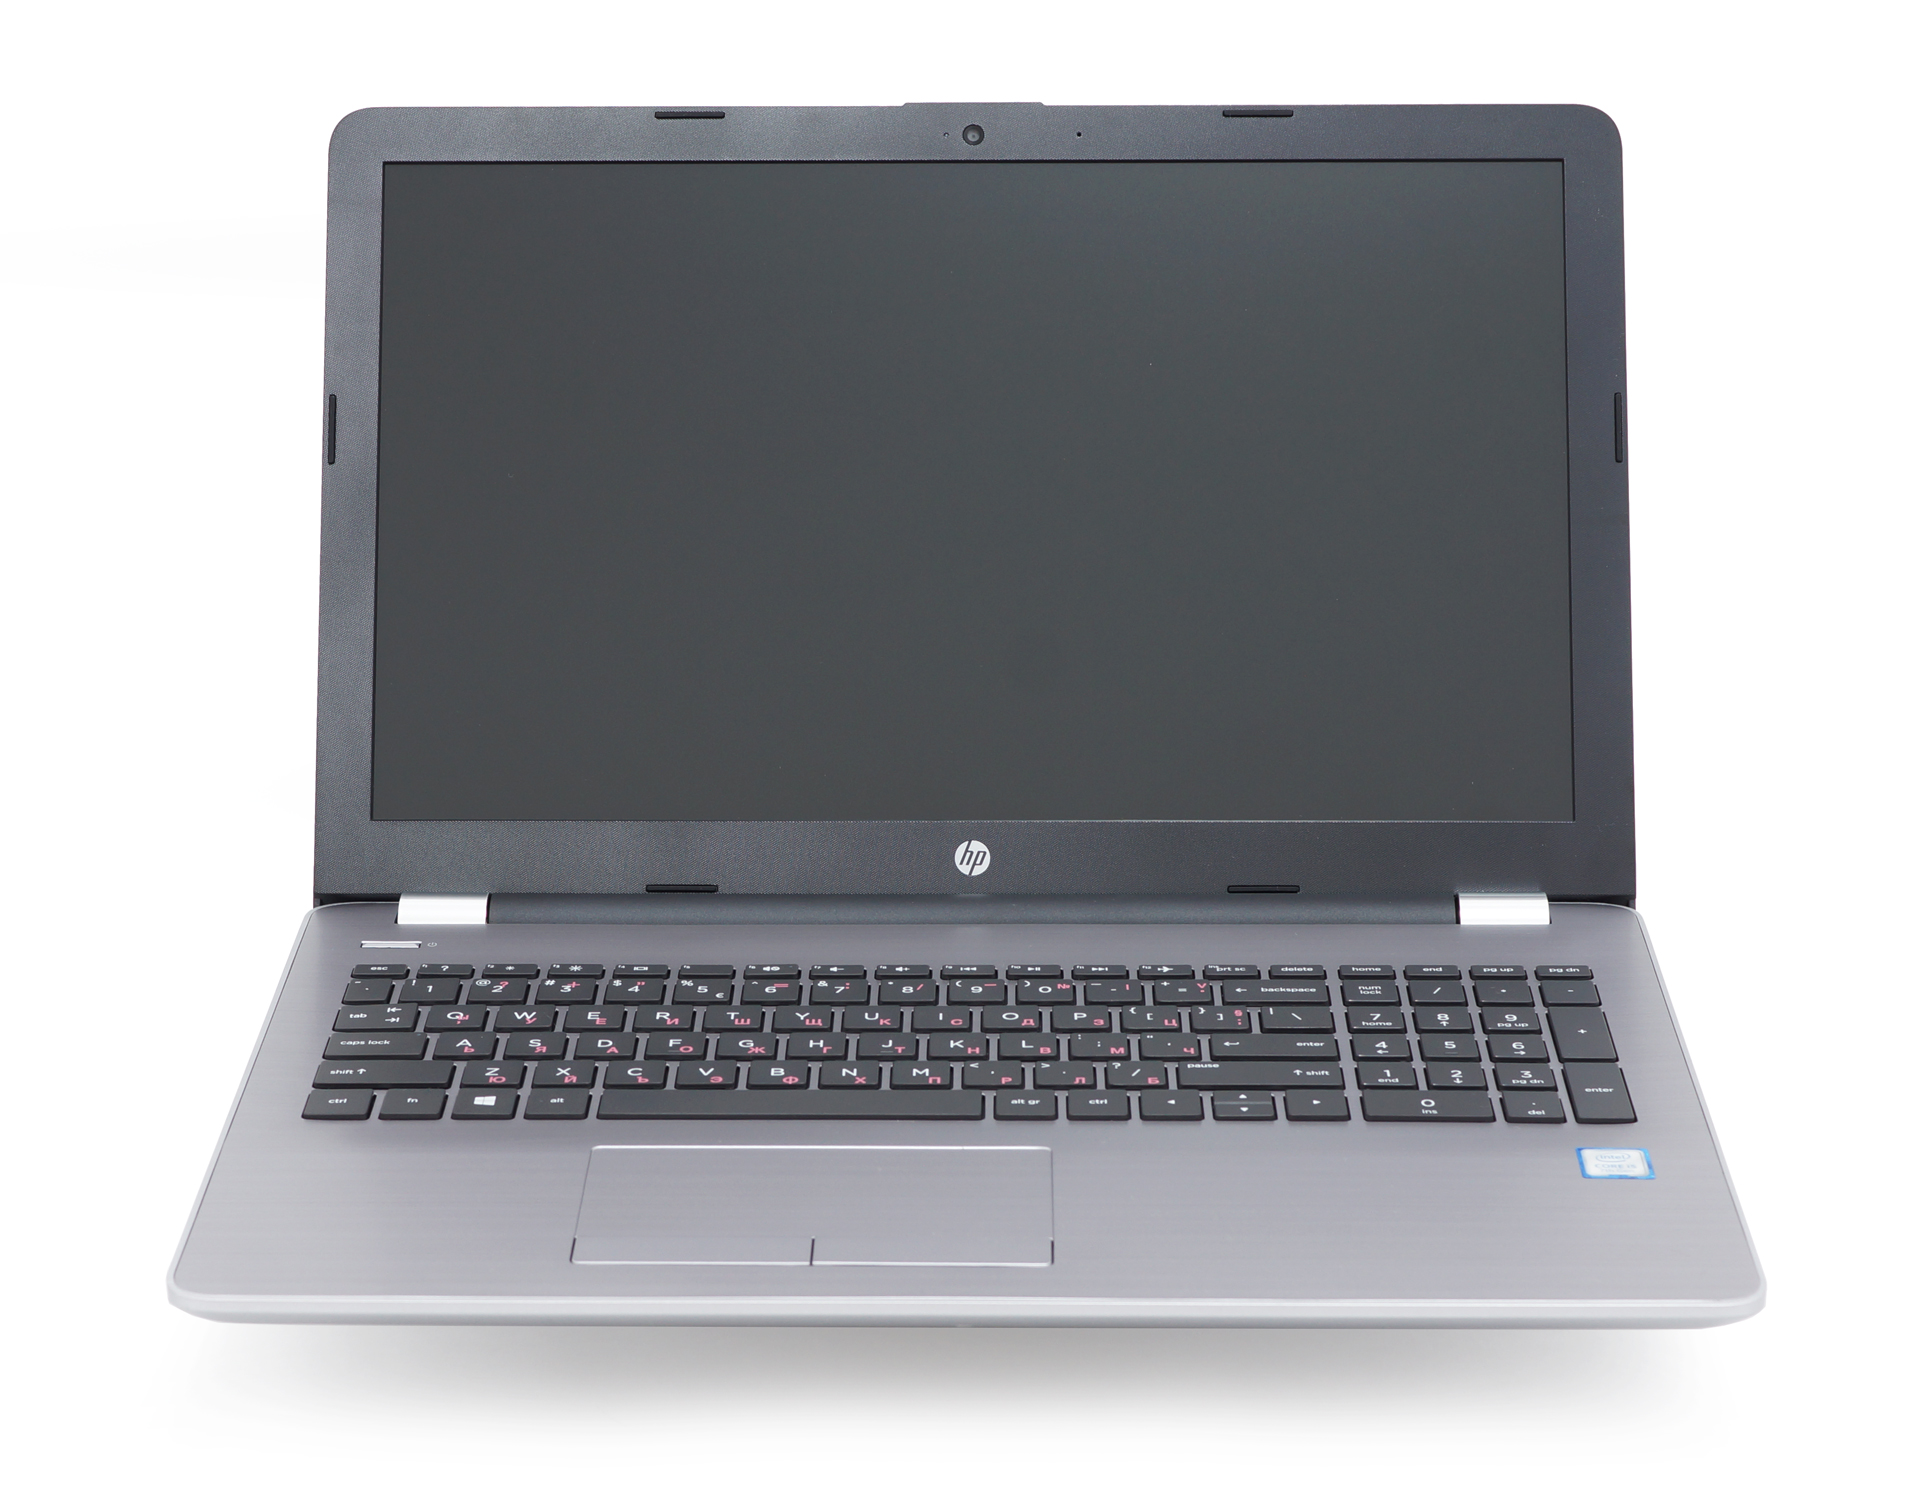 HP  G6 review   the affordable alternative to the ProBooks